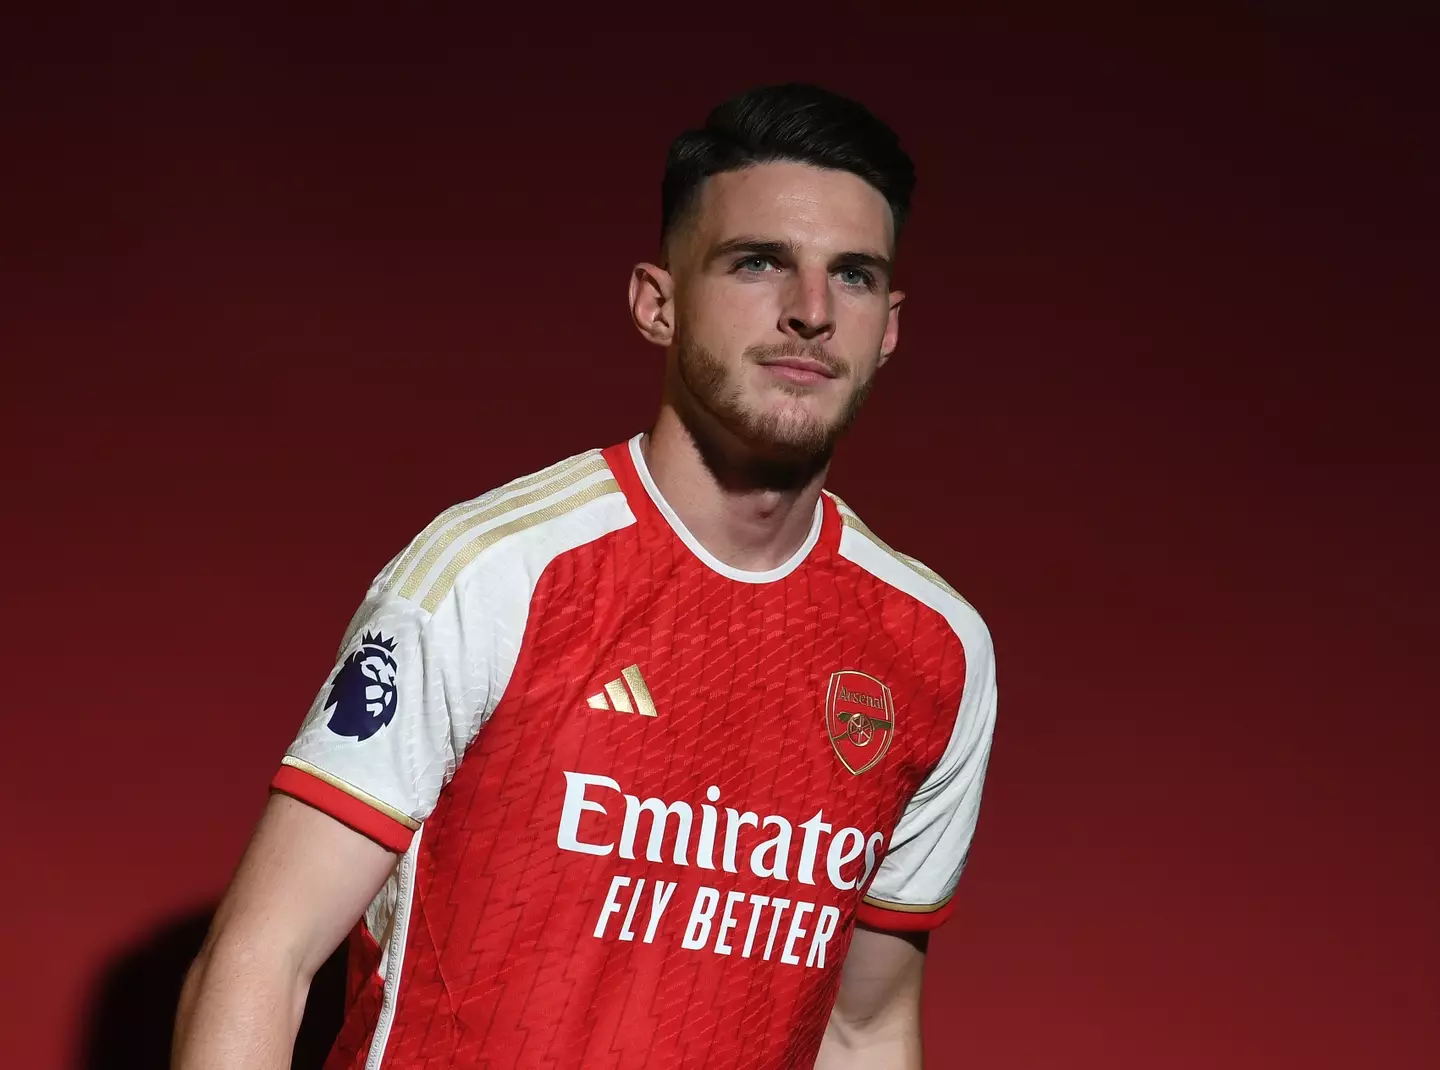 Declan Rice was unveiled as an Arsenal player today.